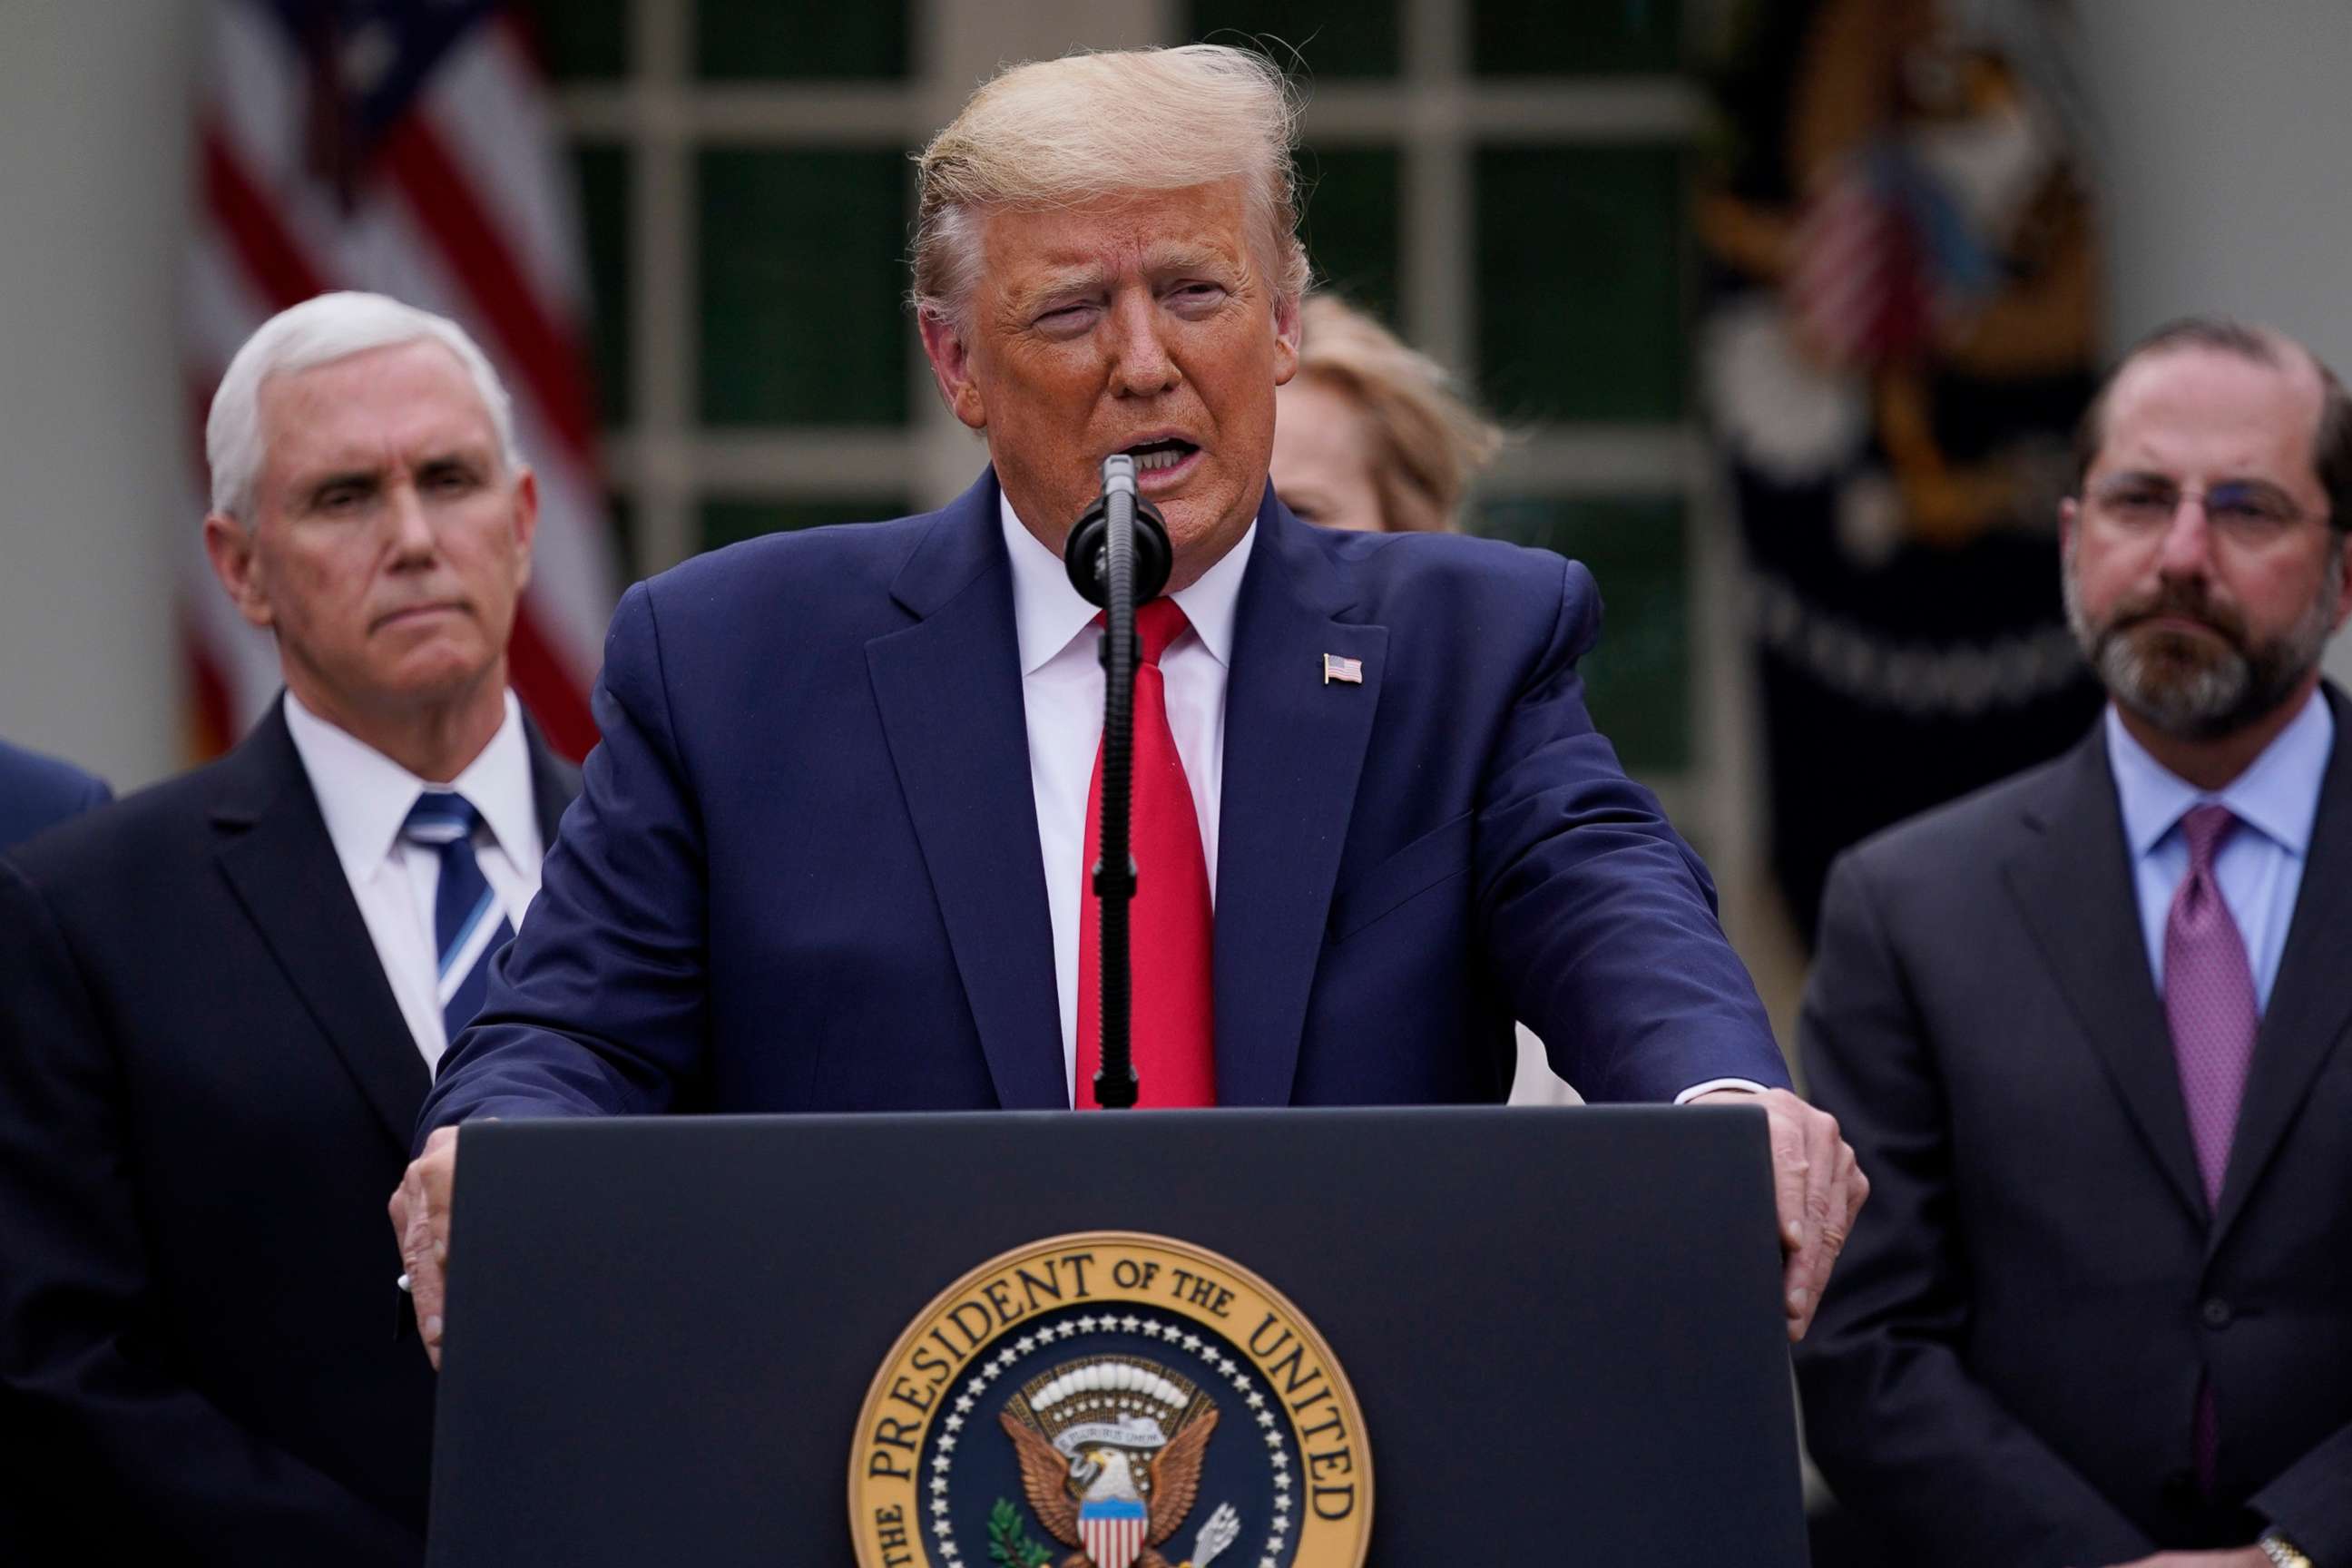 PHOTO: President Donald Trump speaks during a news conference about the coronavirus in the Rose Garden of the White House in Washington, March 13, 2020.